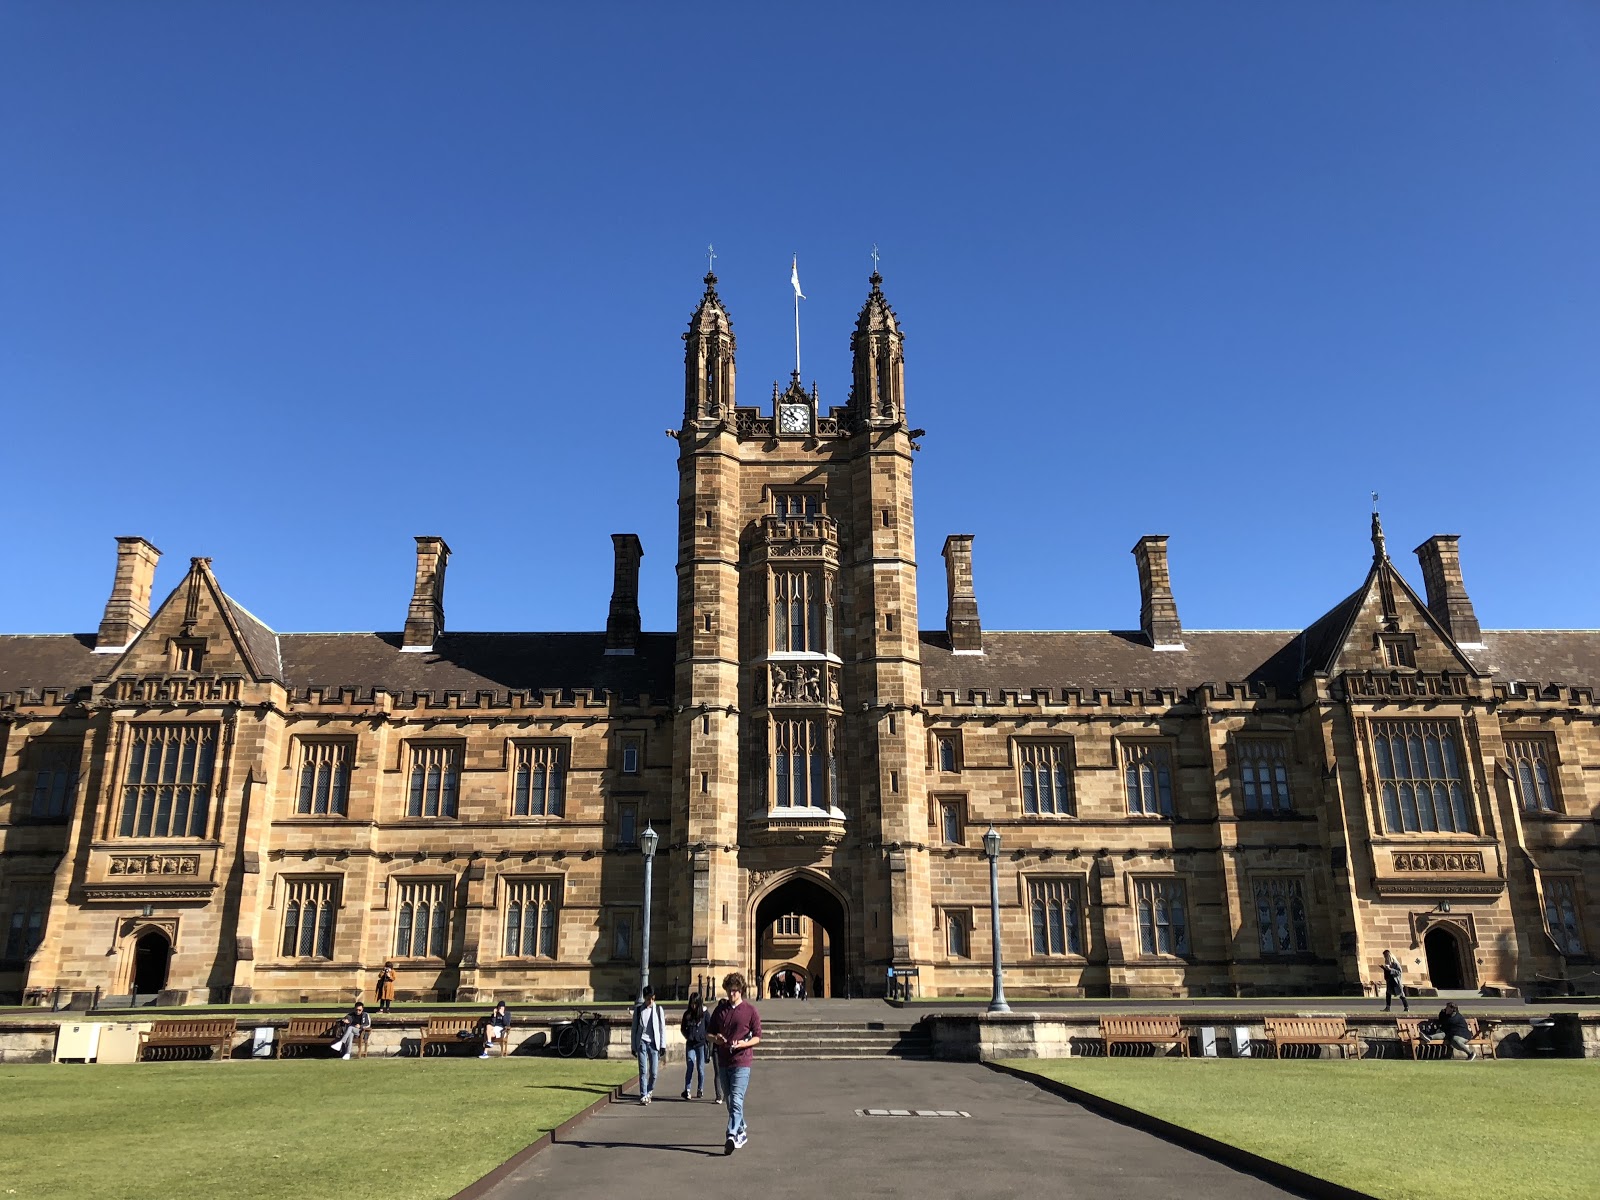 A picture of a cathedral-like building at the University of Sydney